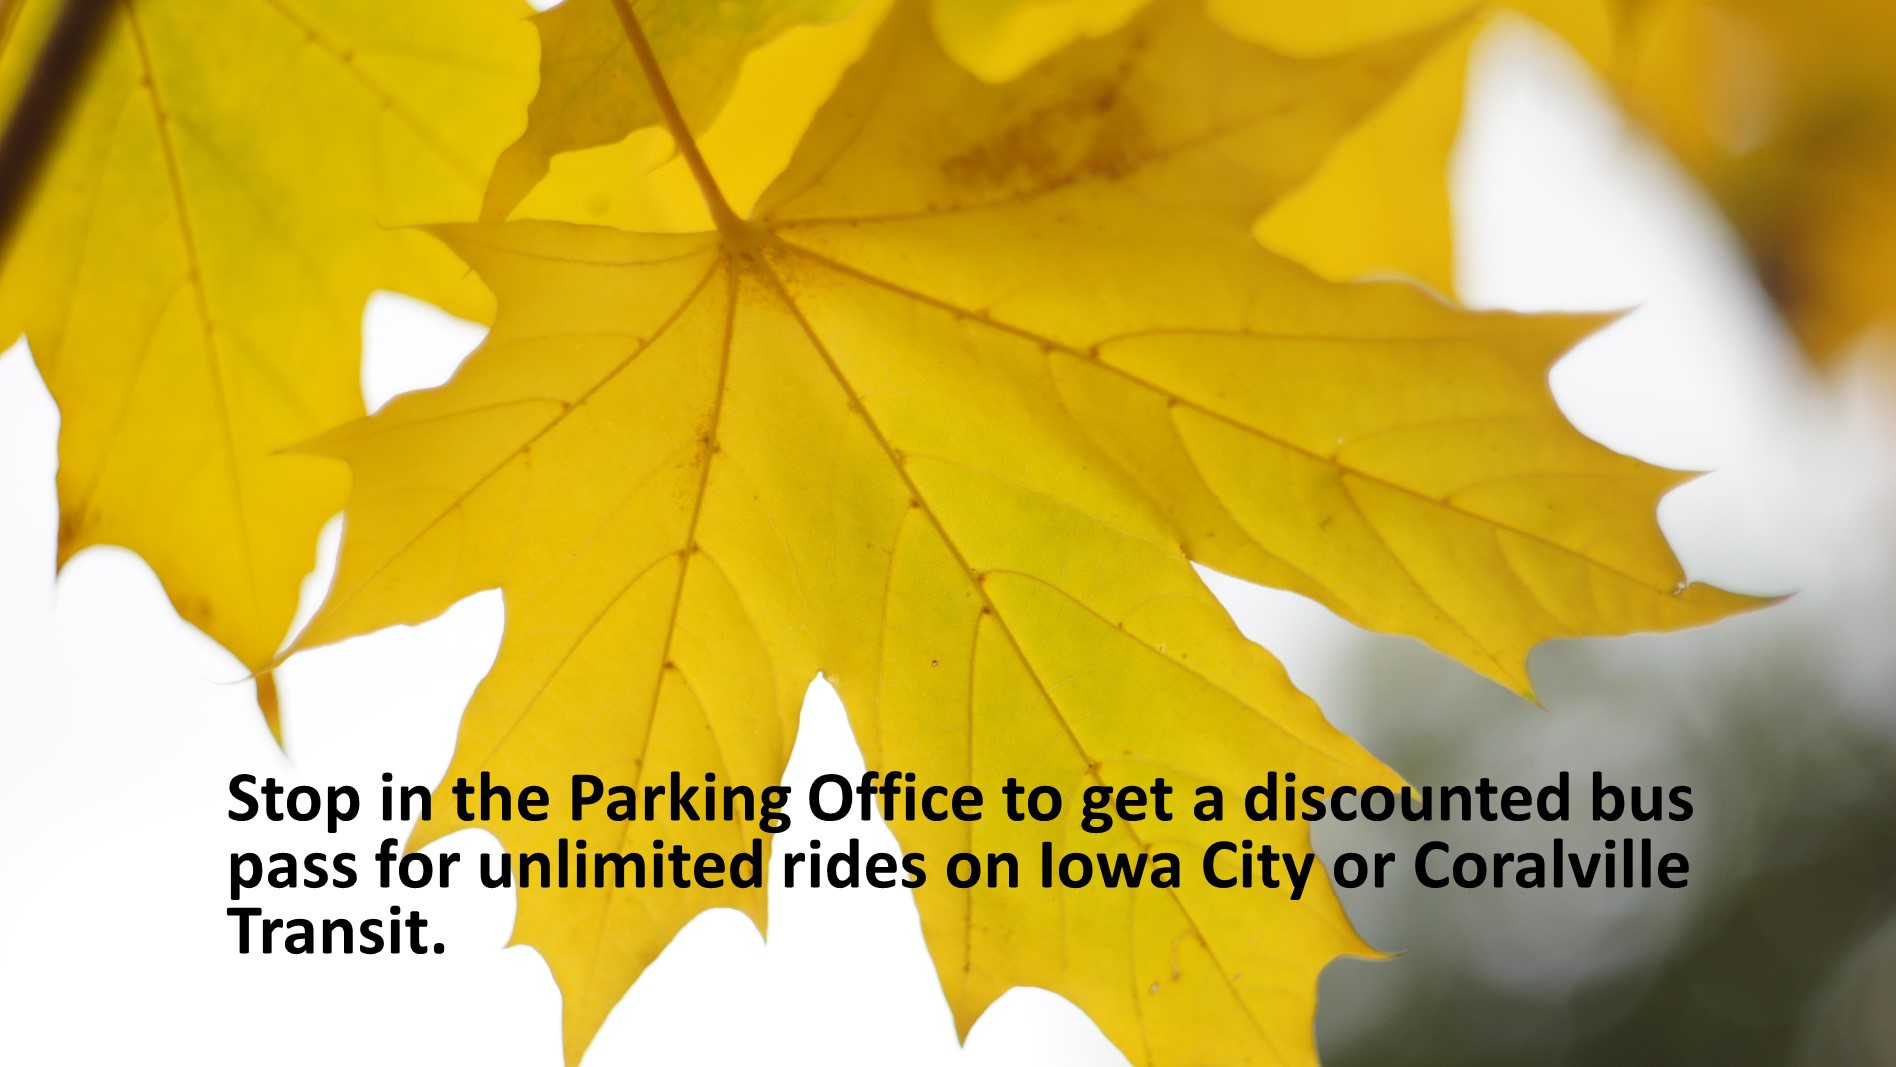 Discounted bus pass at Parking Office